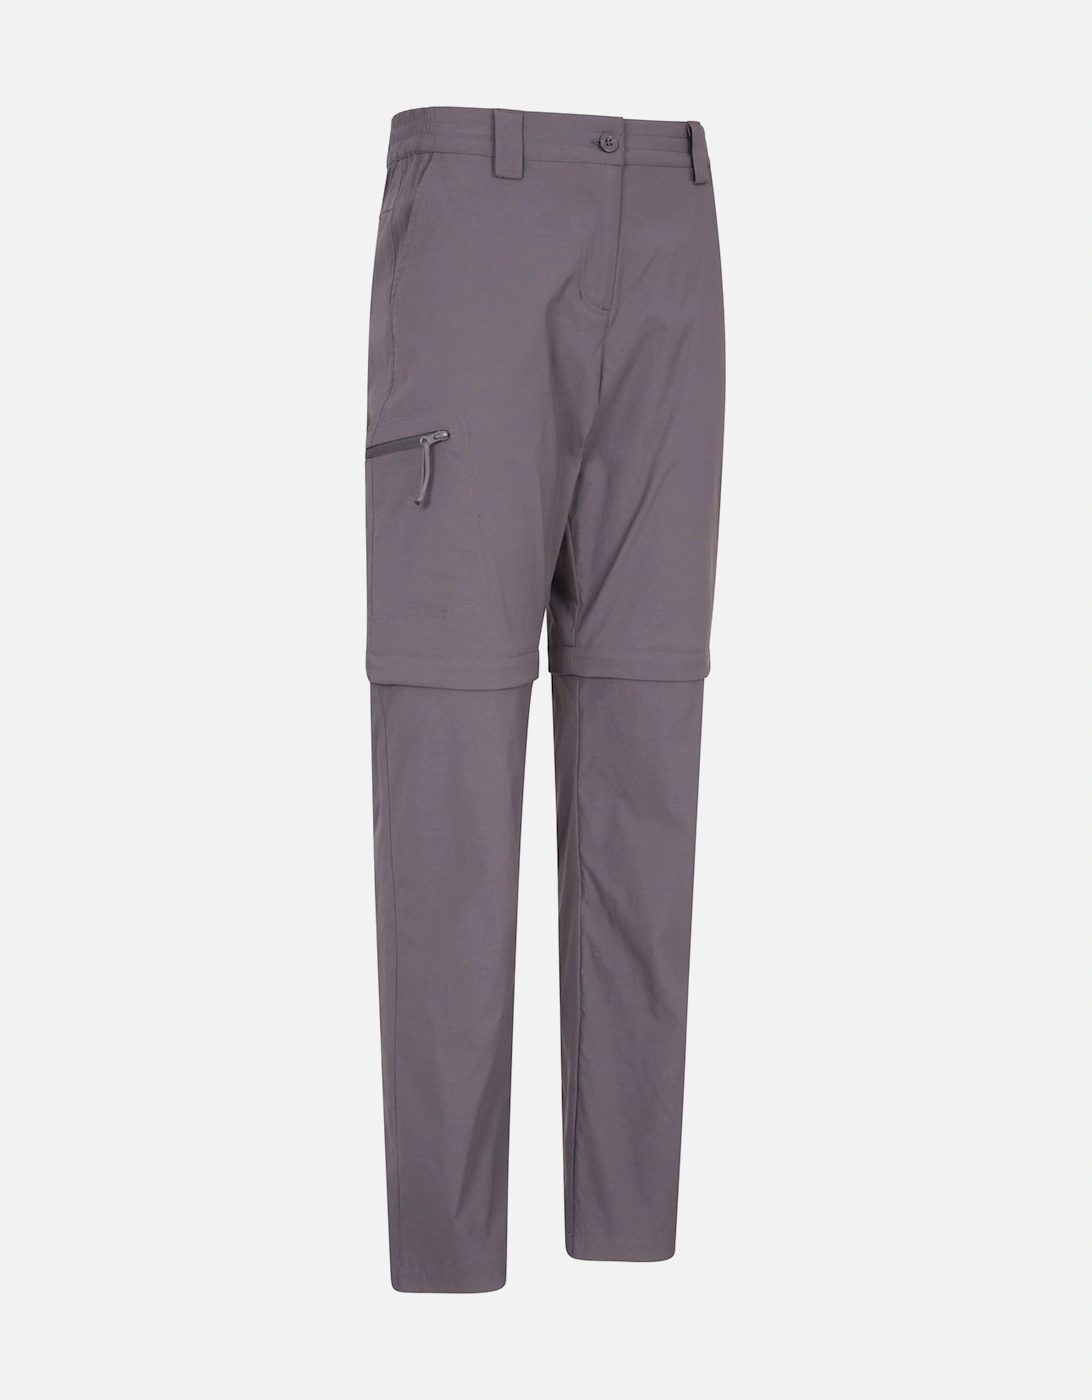 Womens/Ladies Hiker Stretch Zip-Off Trousers